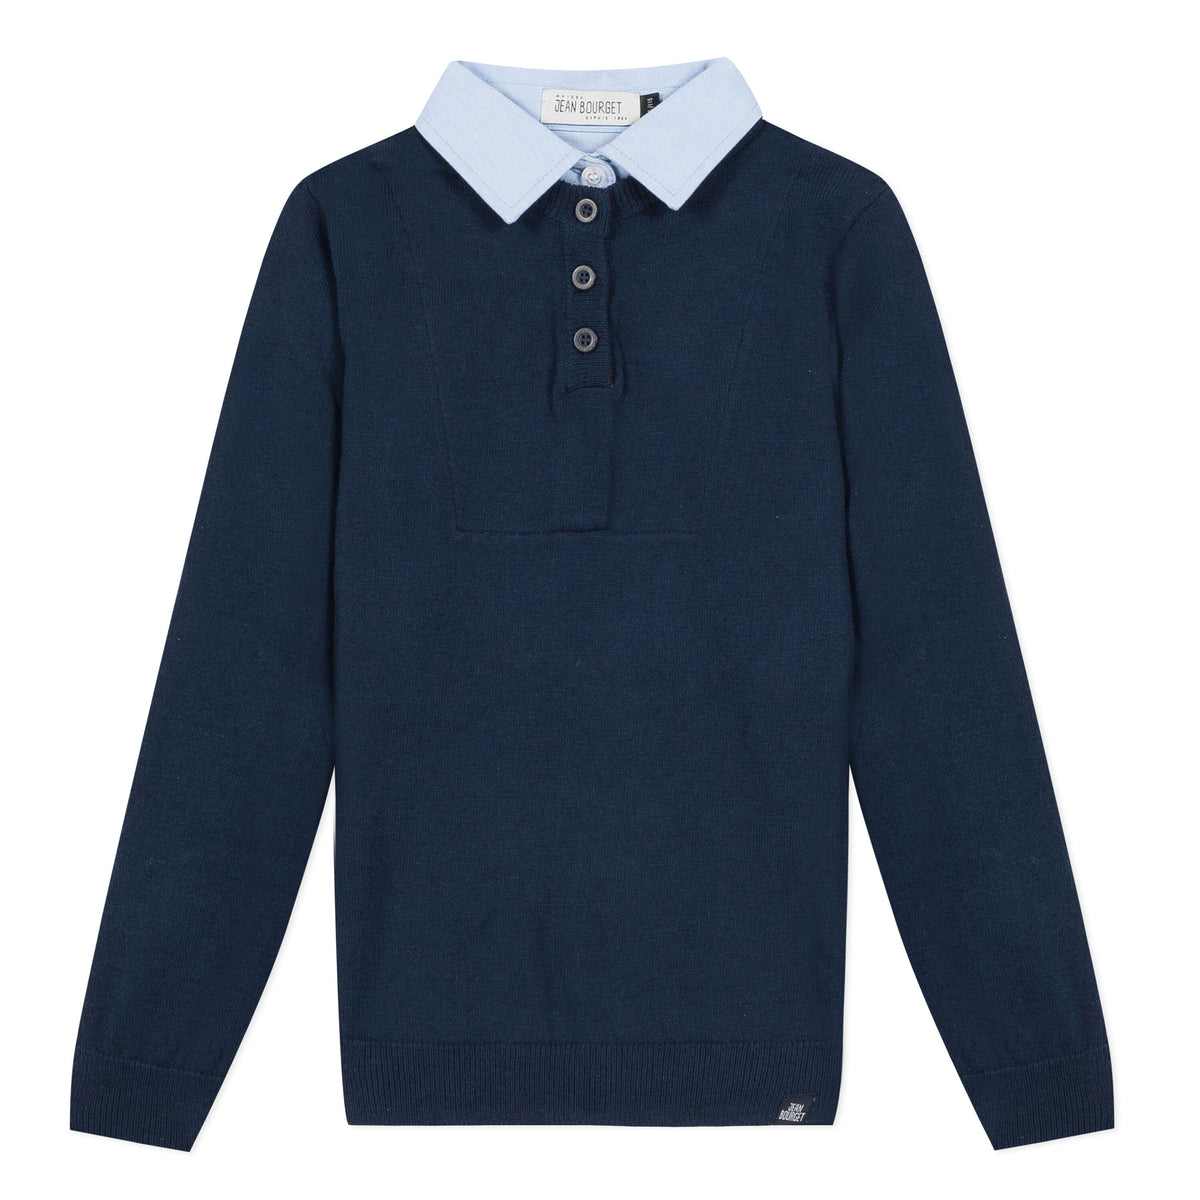 Classic revisited, this long-sleeved navy wool knit features a sky cotton shirt collar and burgundy seams. Three button closure marked Jean Bourget.